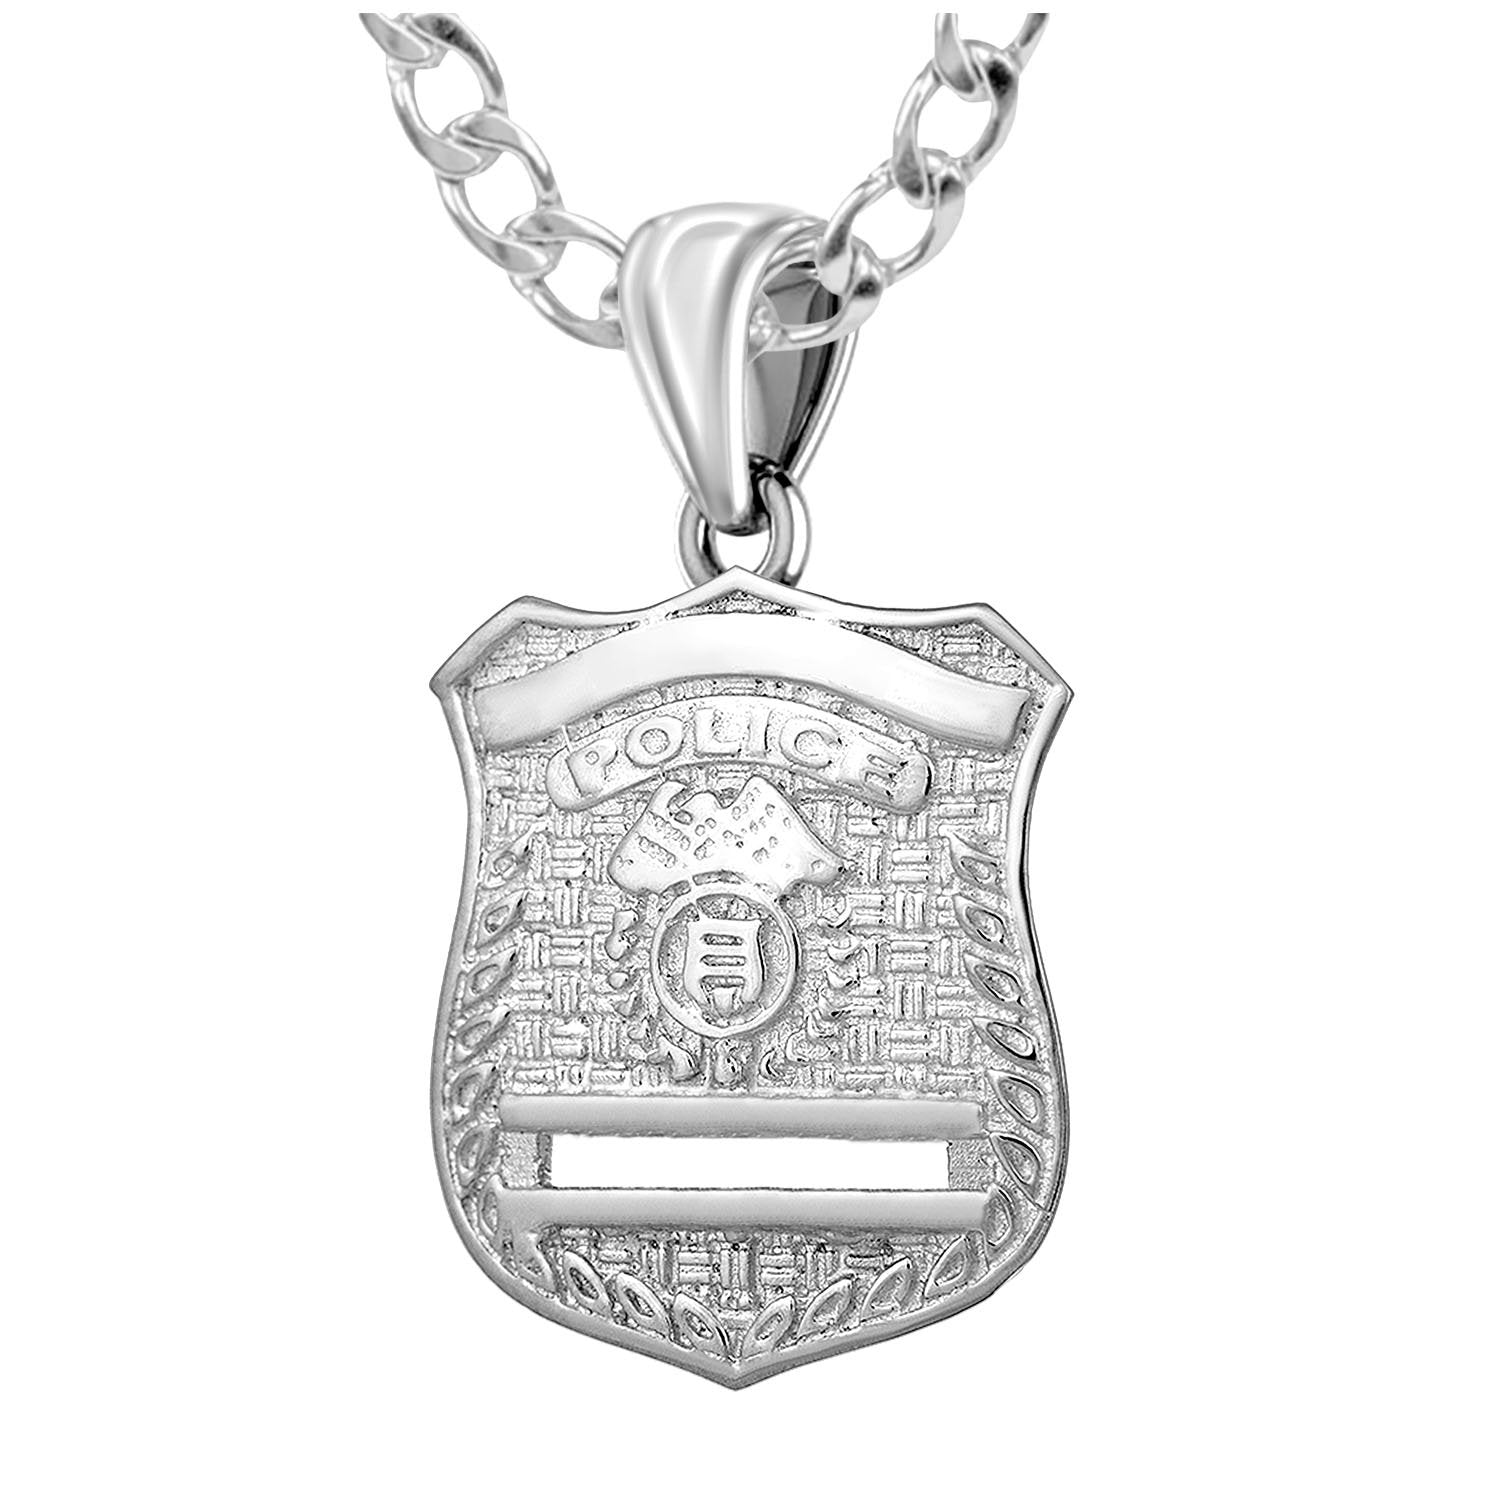 Police Badge Necklace In Silver - 3mm Rounded Curb Chain